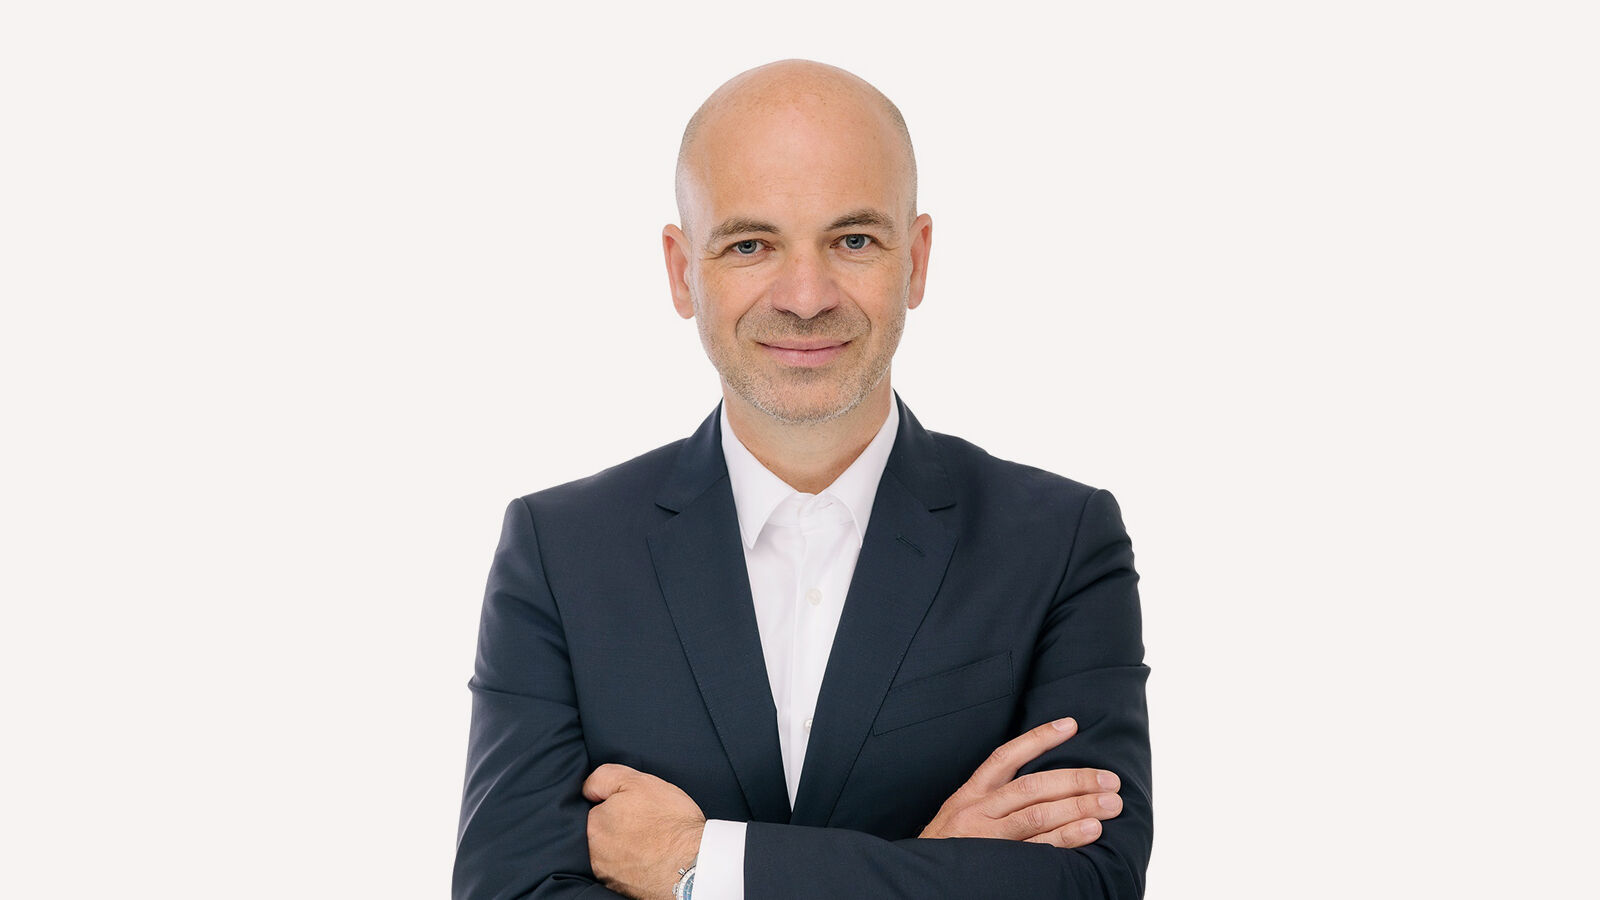 Manfred Harrer, Executive Vice President and Head of Genesis & Performance Development Tech Unit